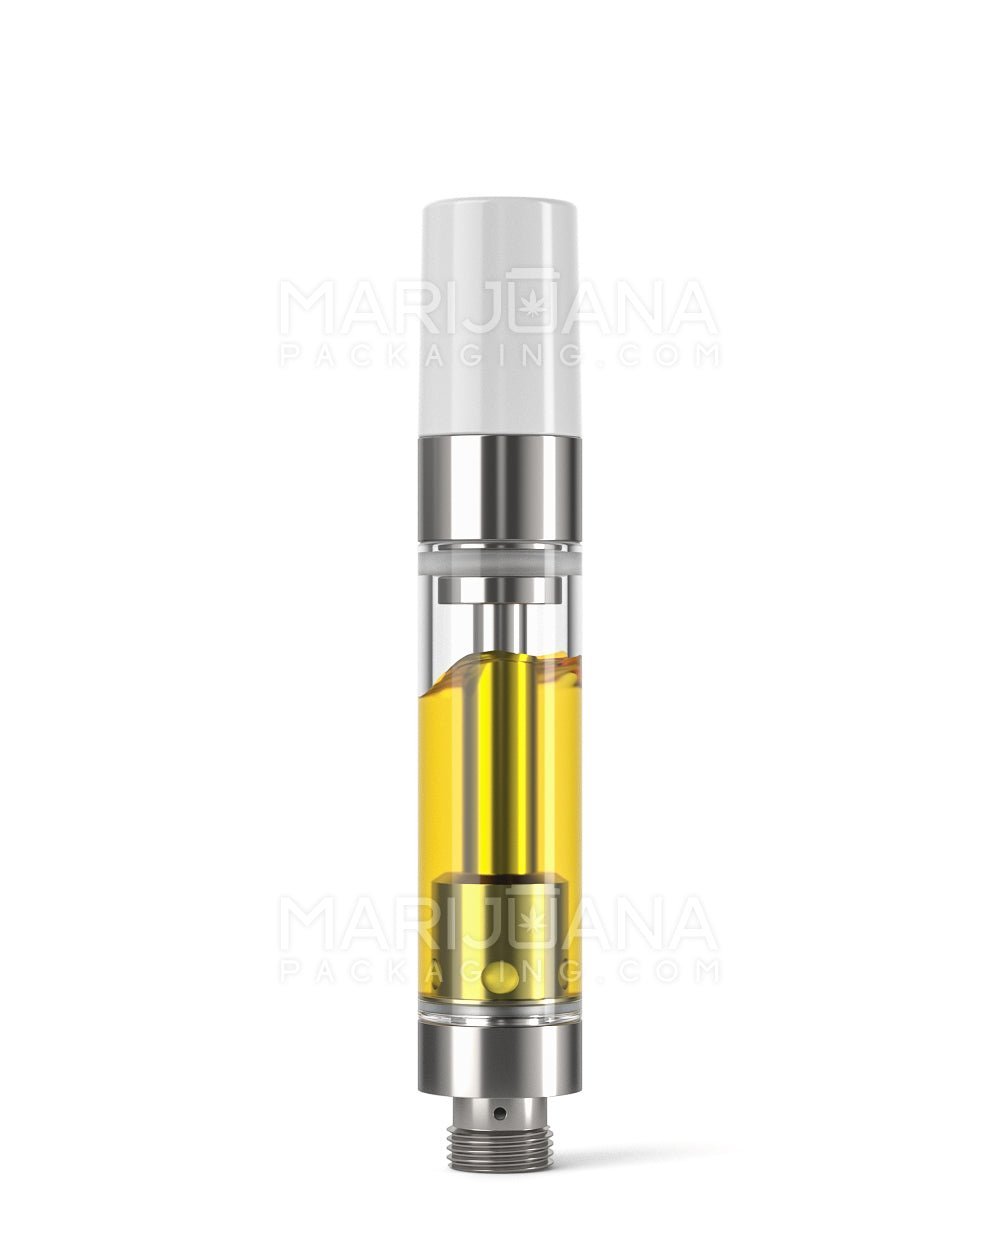 Ceramic Core Glass Vape Cartridge with Round White Plastic Mouthpiece | 1mL - Press On - 100 Count - 2